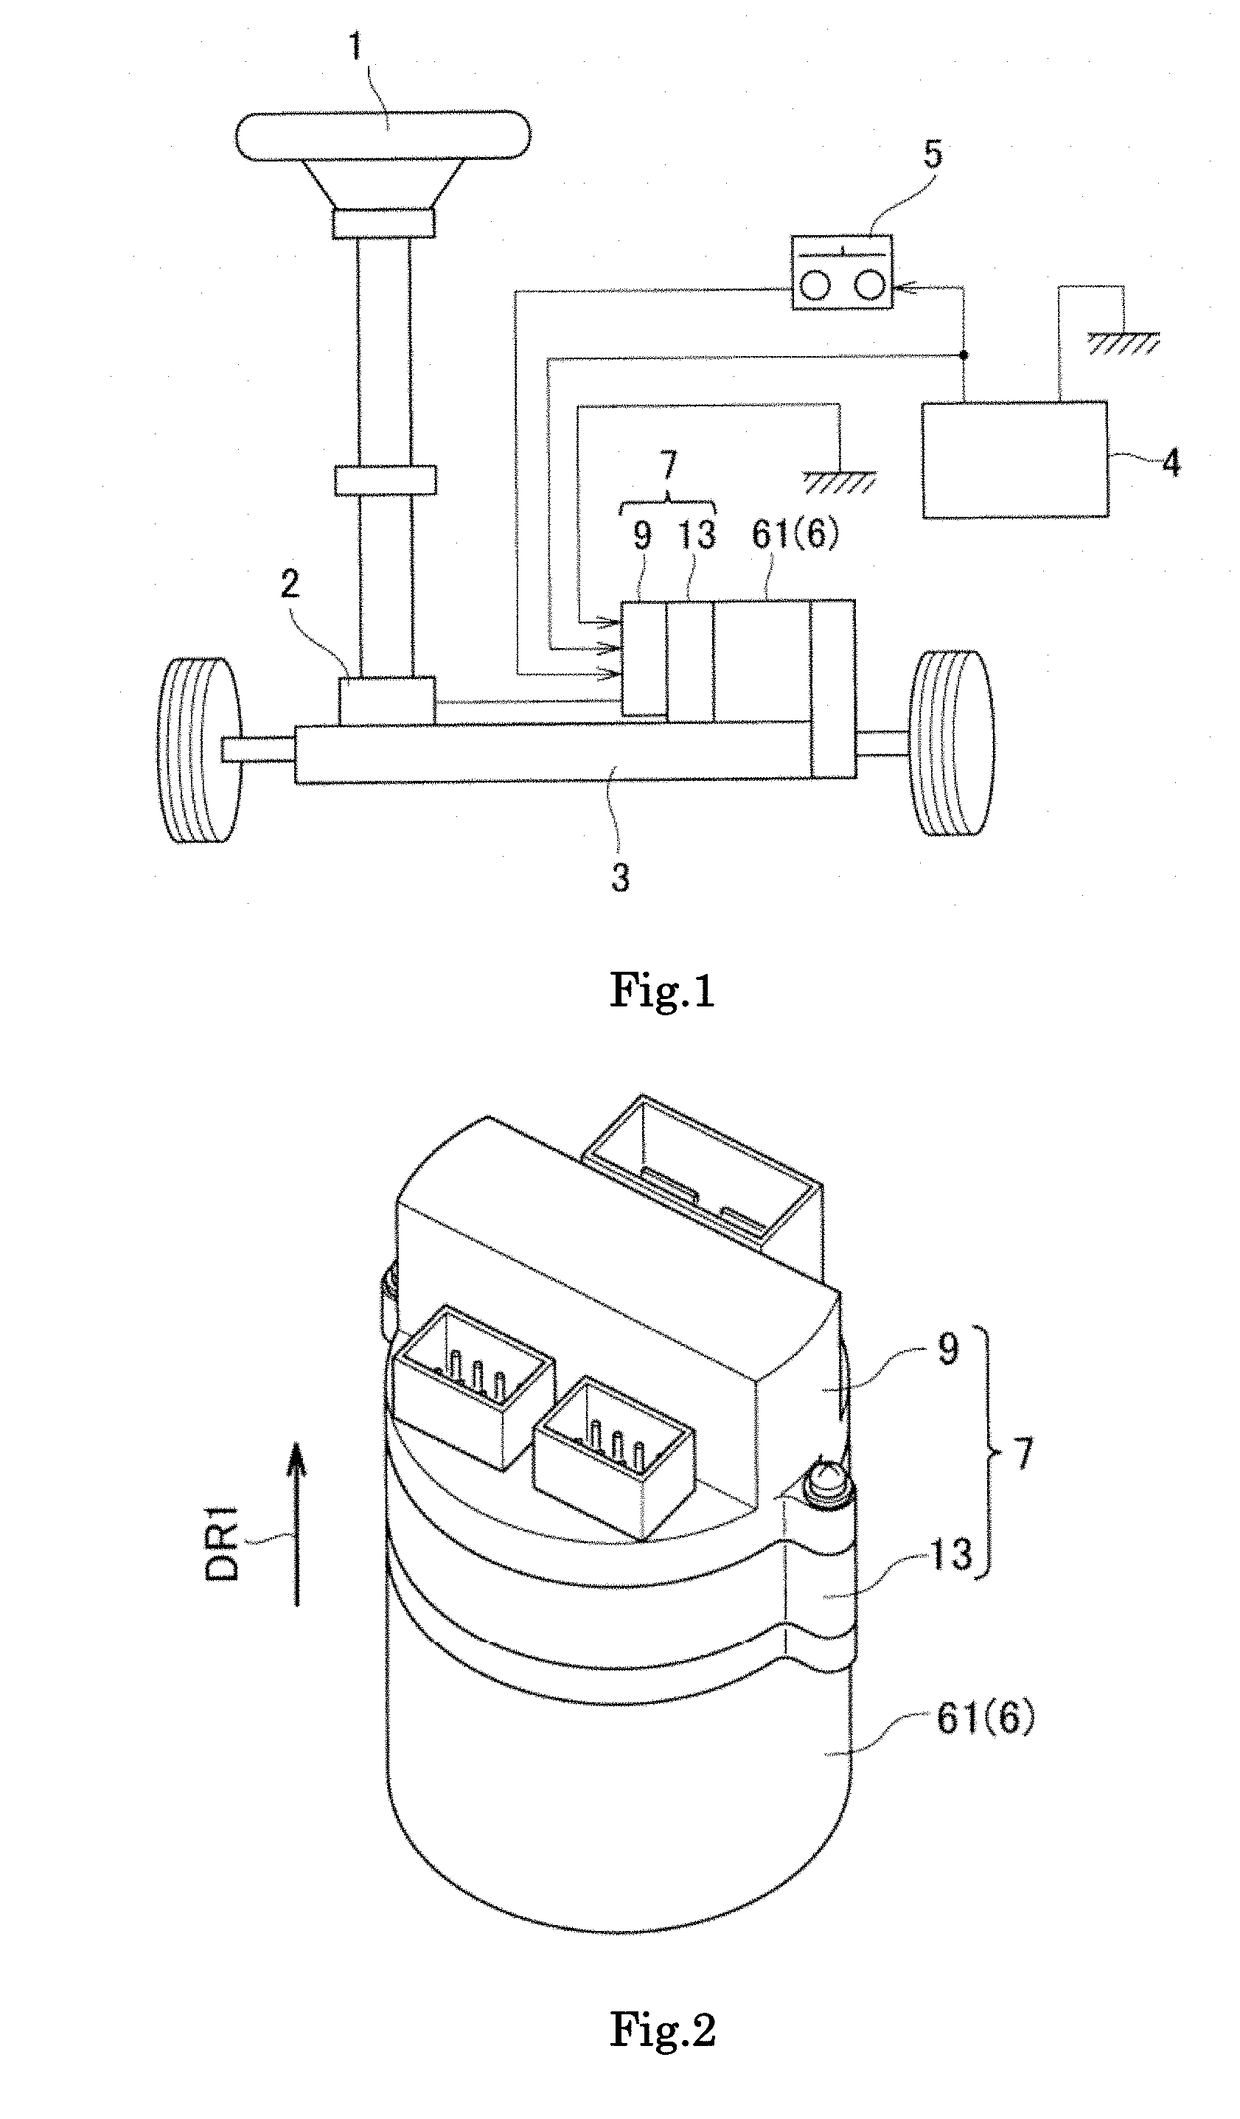 Motor drive device for electric power steering including heat sink and external connector